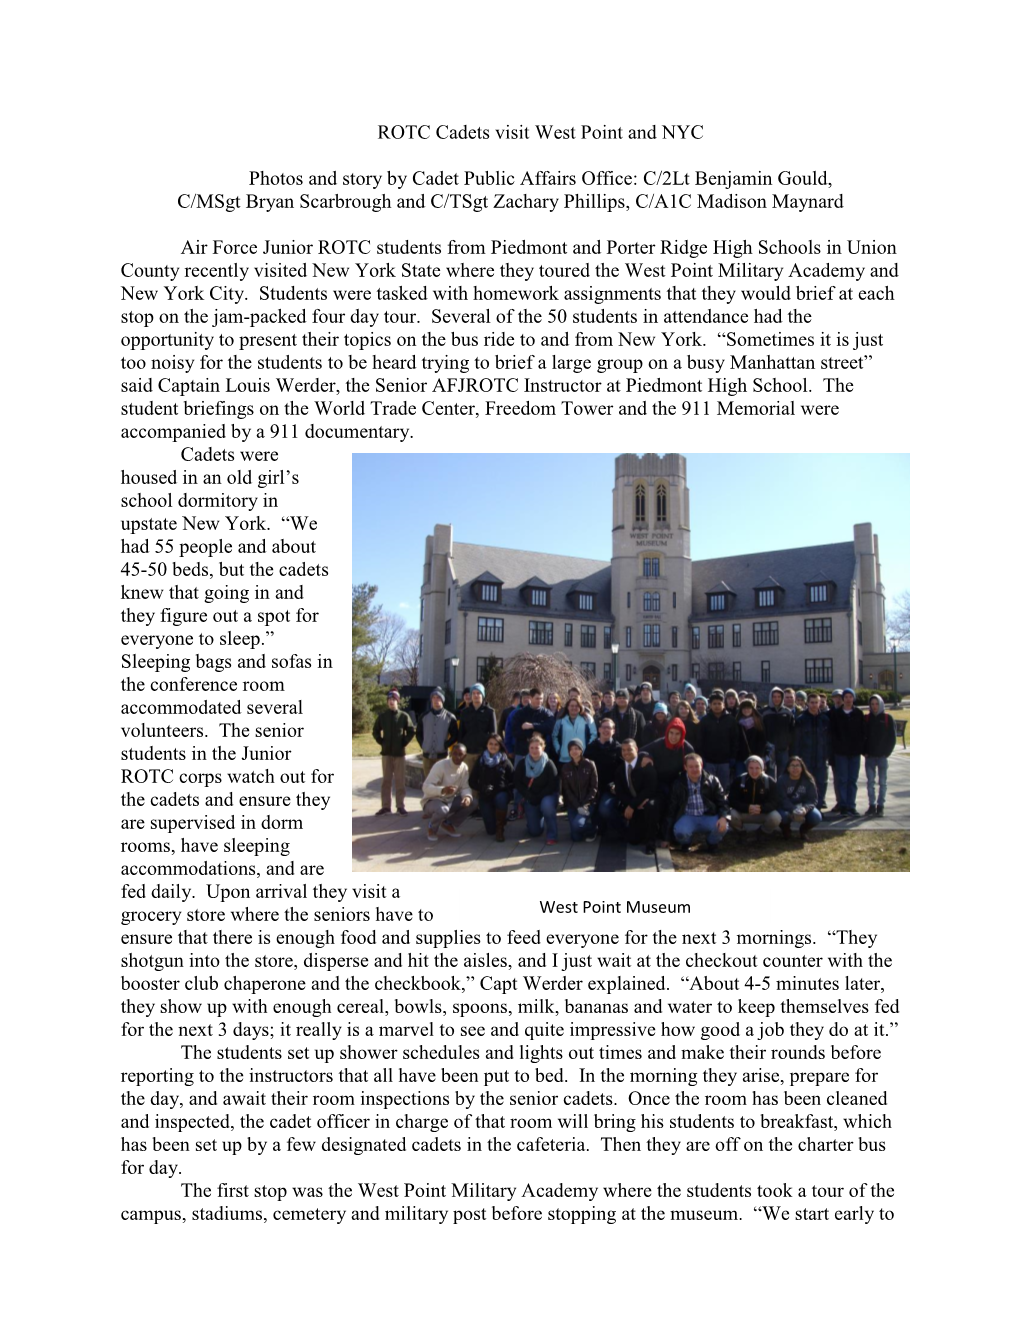 Download ROTC Cadets Visit West Point and NYC.Pdf